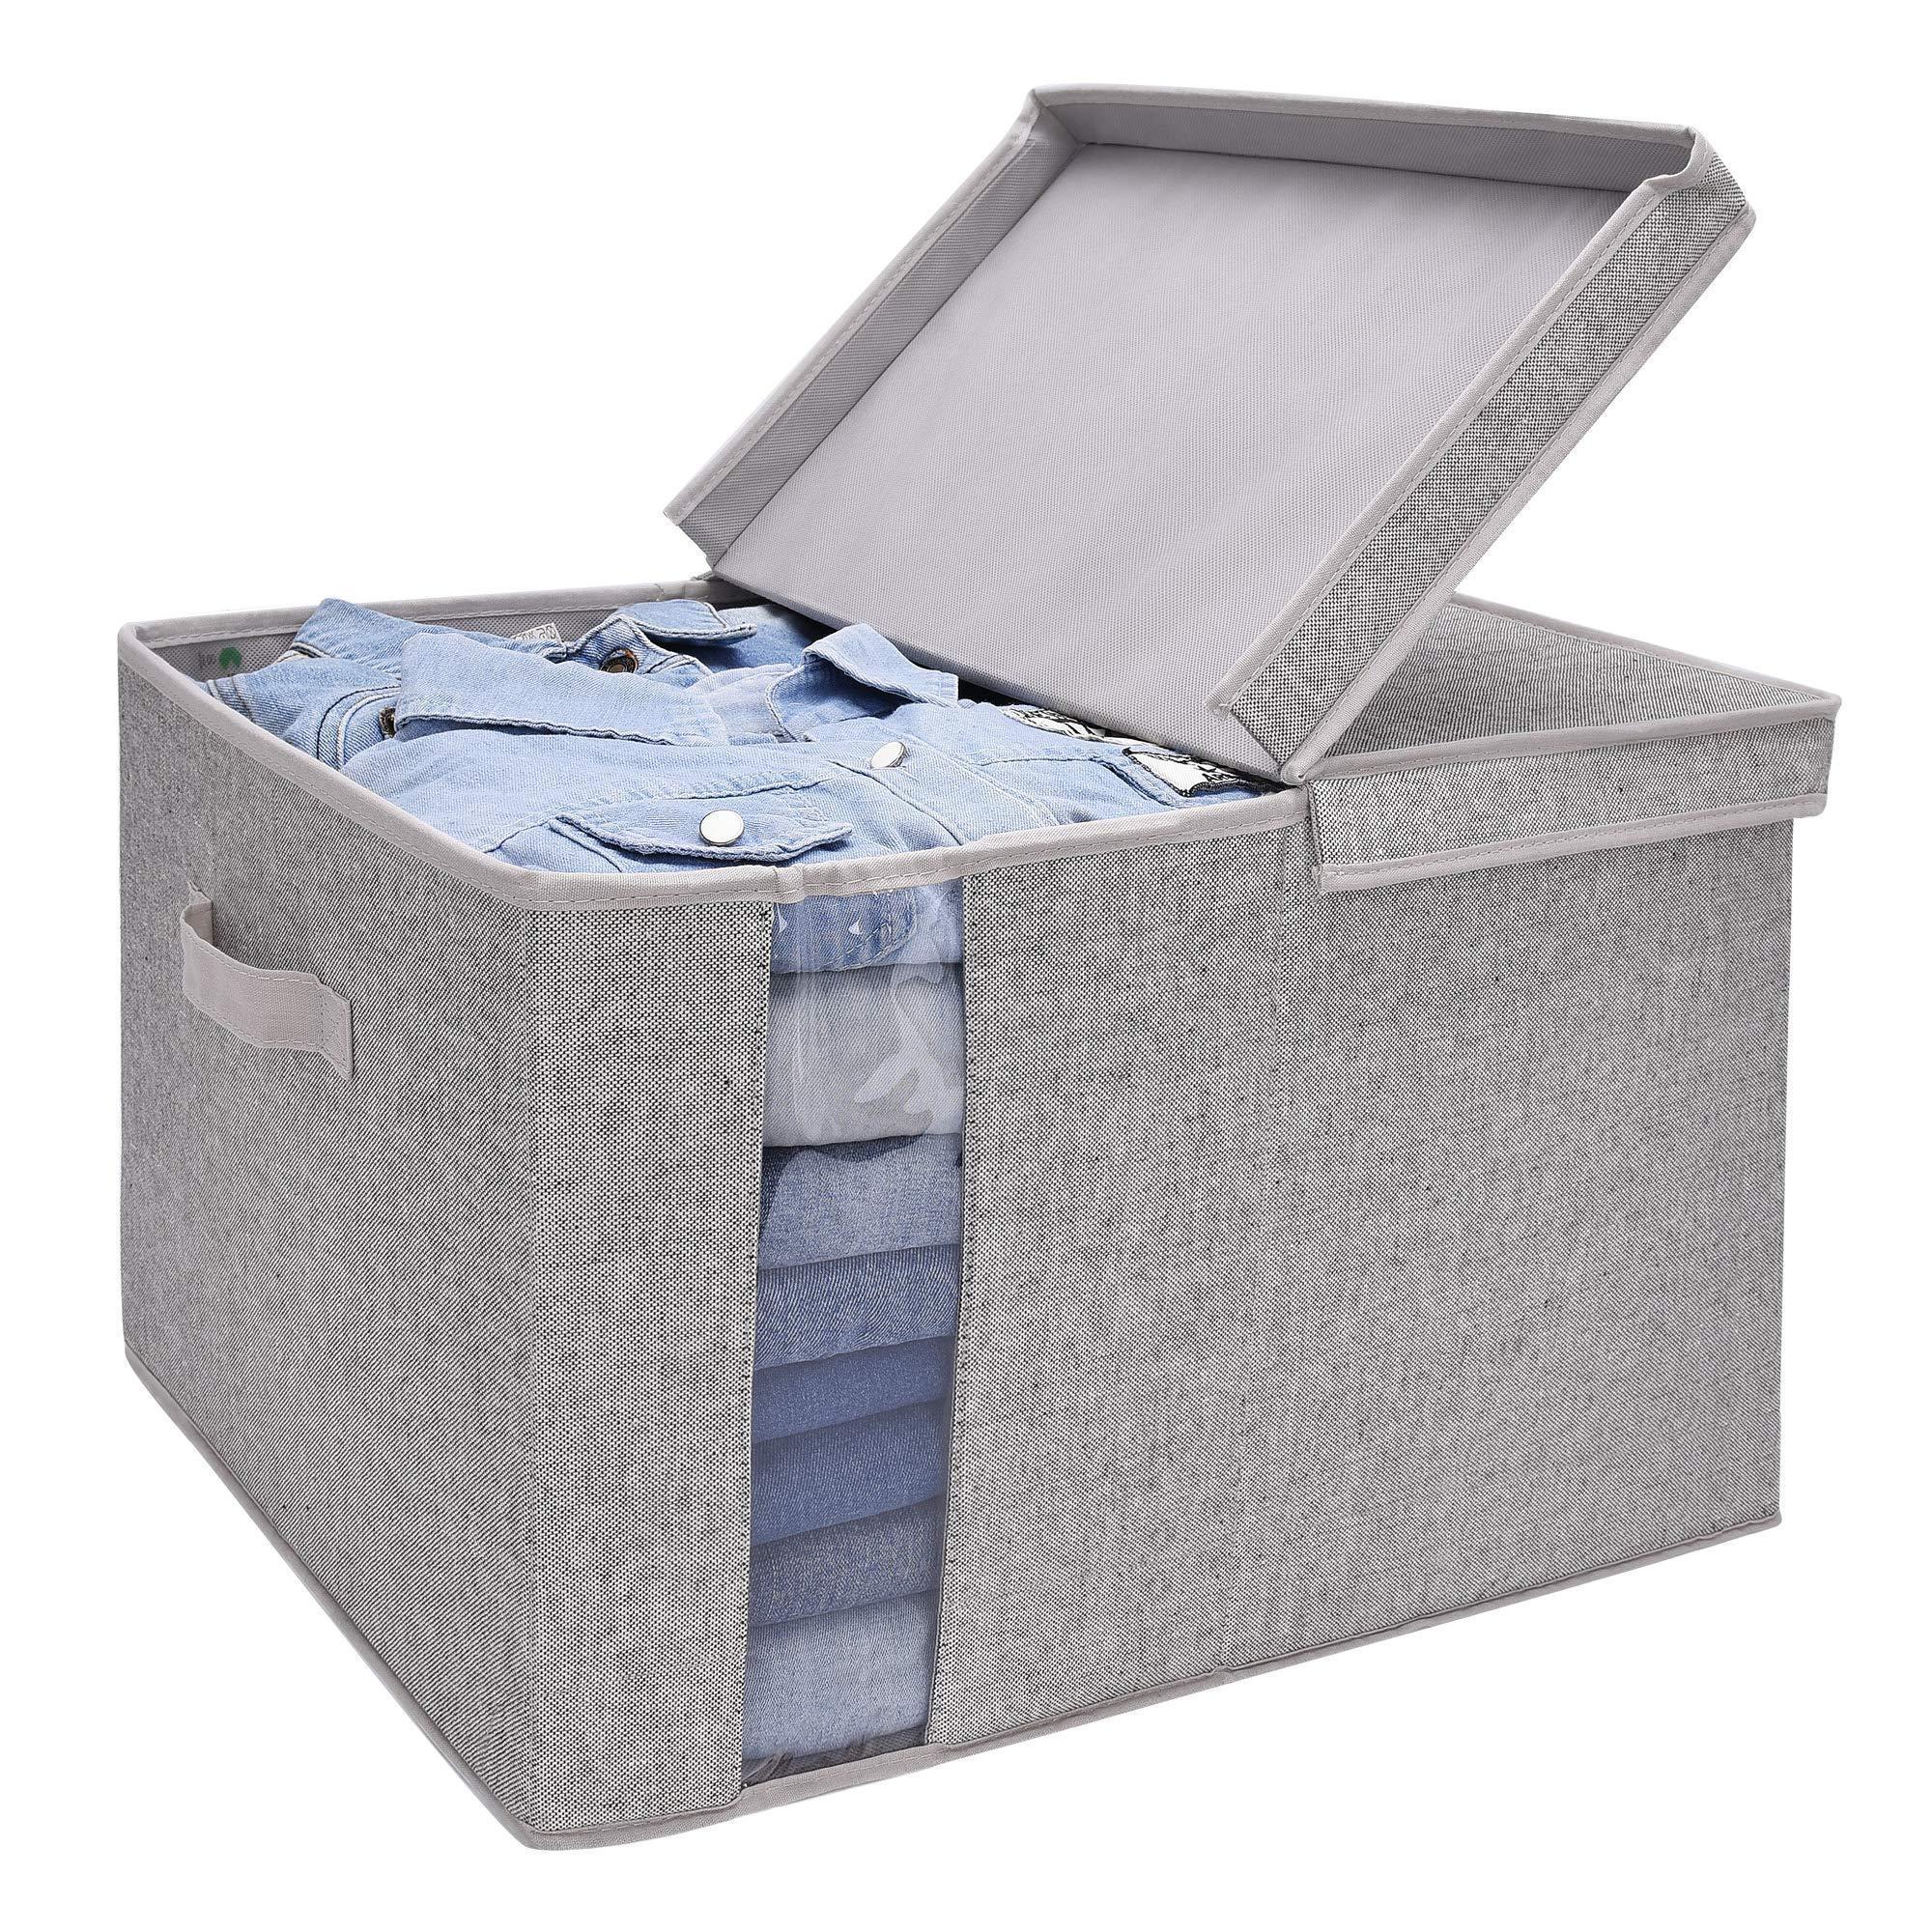 Featured storageworks closet storage organizer with transparent clear window storage boxes with lid double open lid gray cotton fabric box jumbo